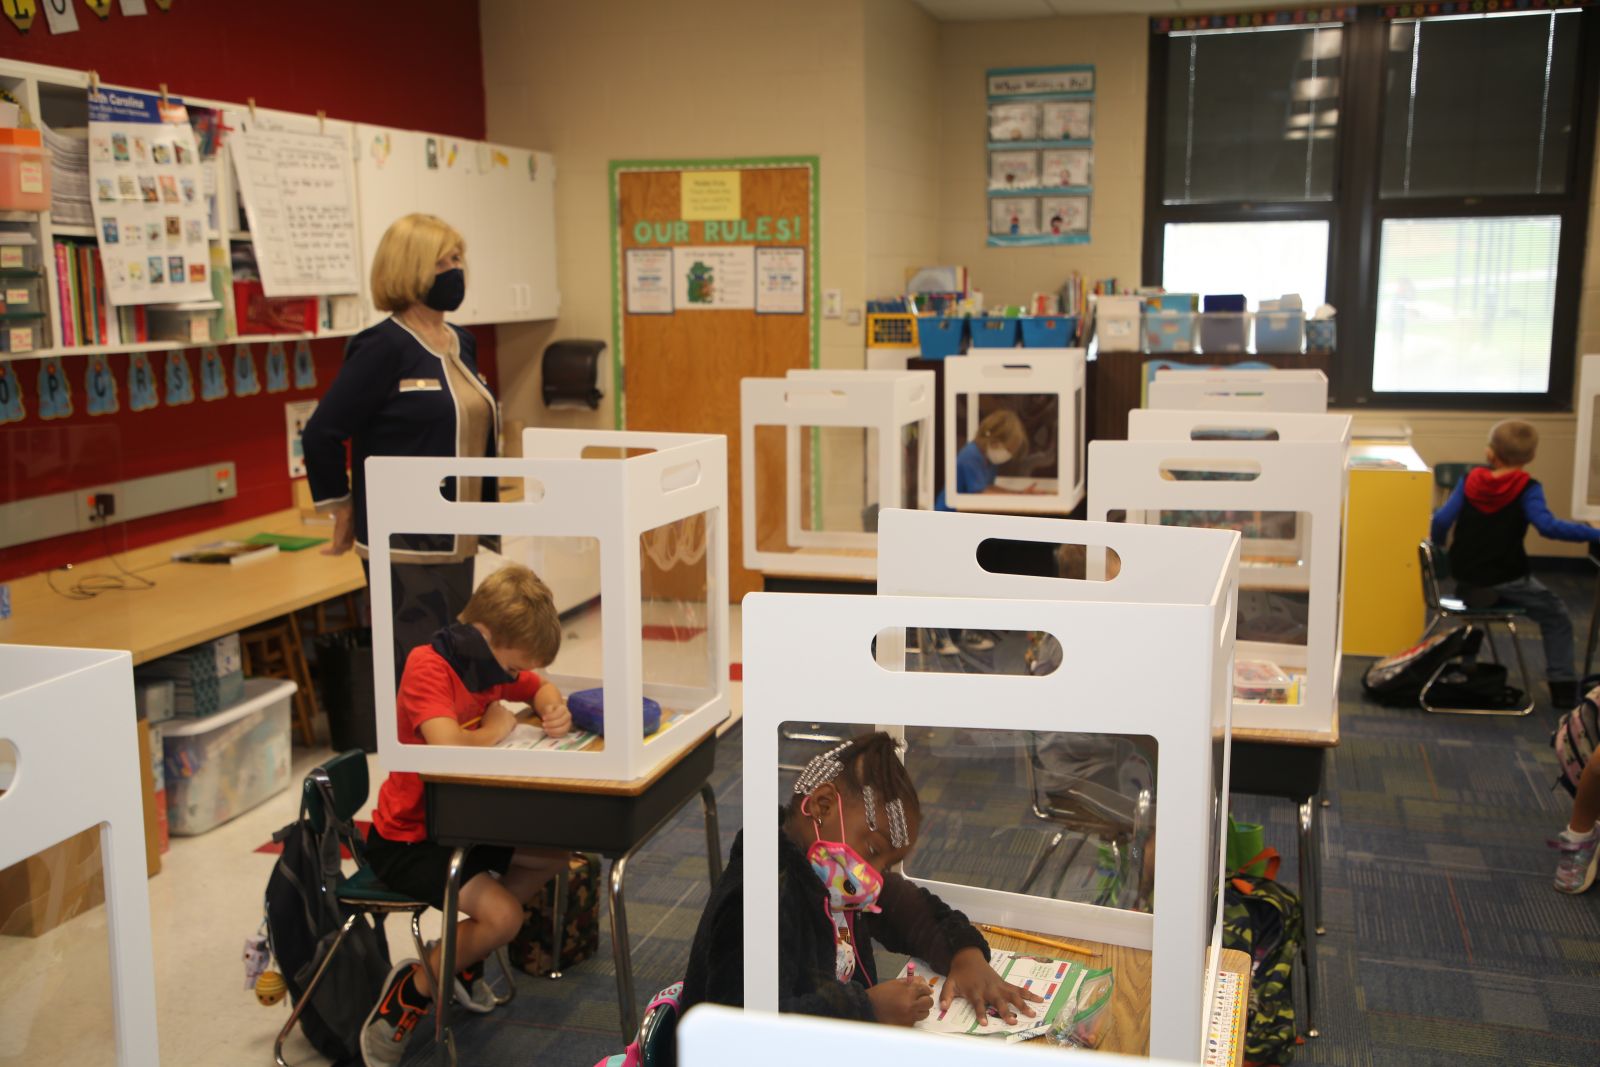 Education superintendent Molly Spearman stands by as students try out new plexiglass dividers. (Photo/Provided)